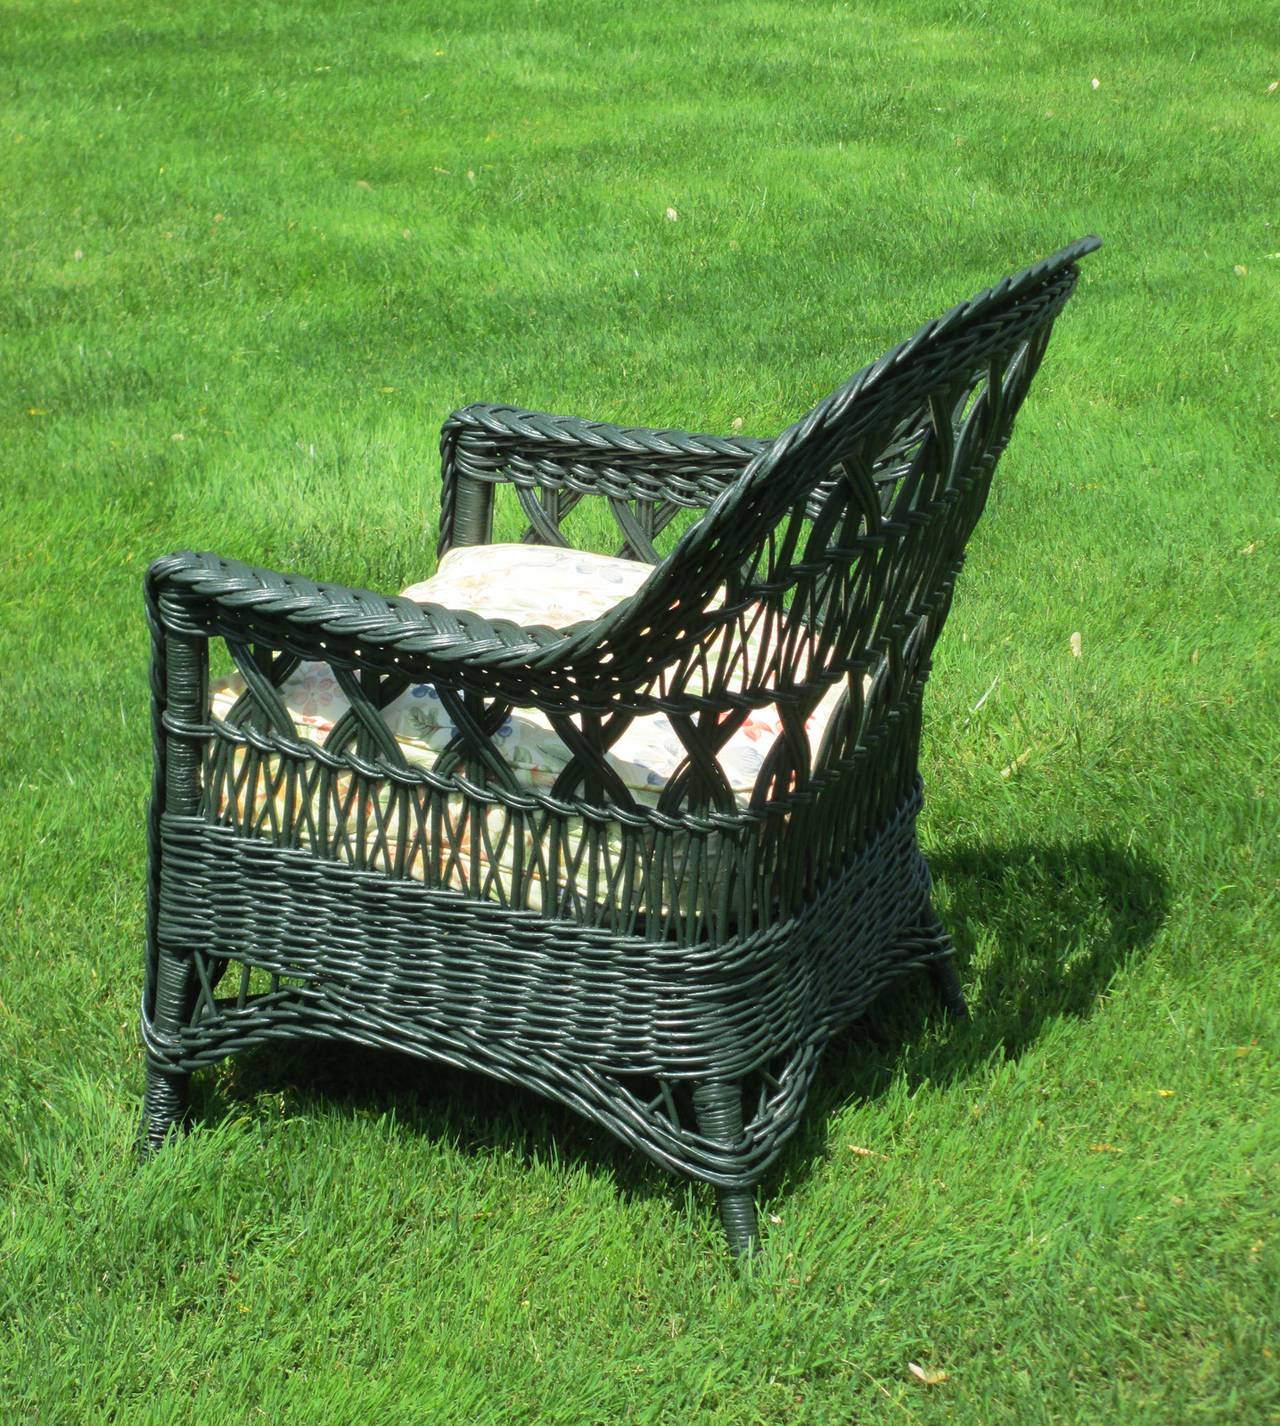 Bar Harbor Wicker Armchair In Excellent Condition For Sale In Sheffield, MA